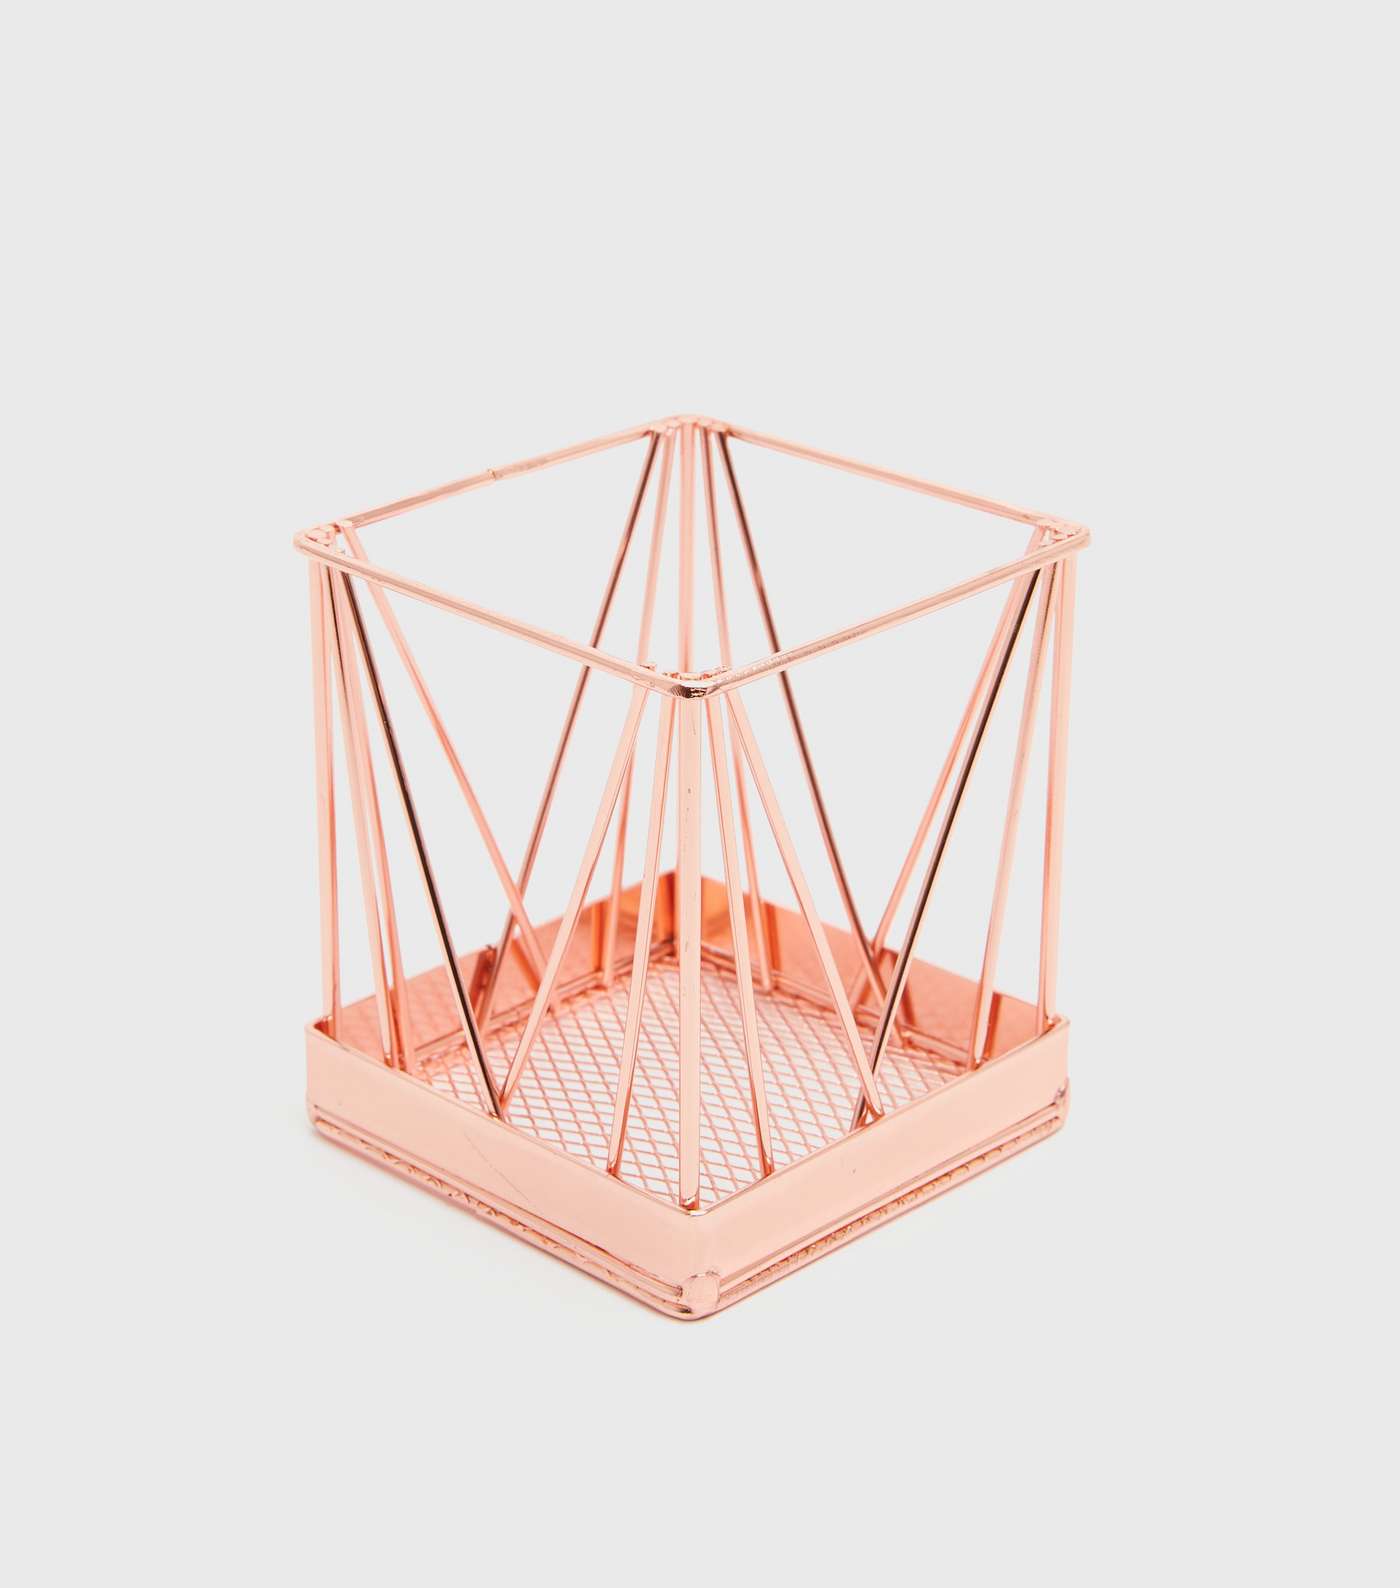 Rose Gold Pyramid Wire Pen Pot 